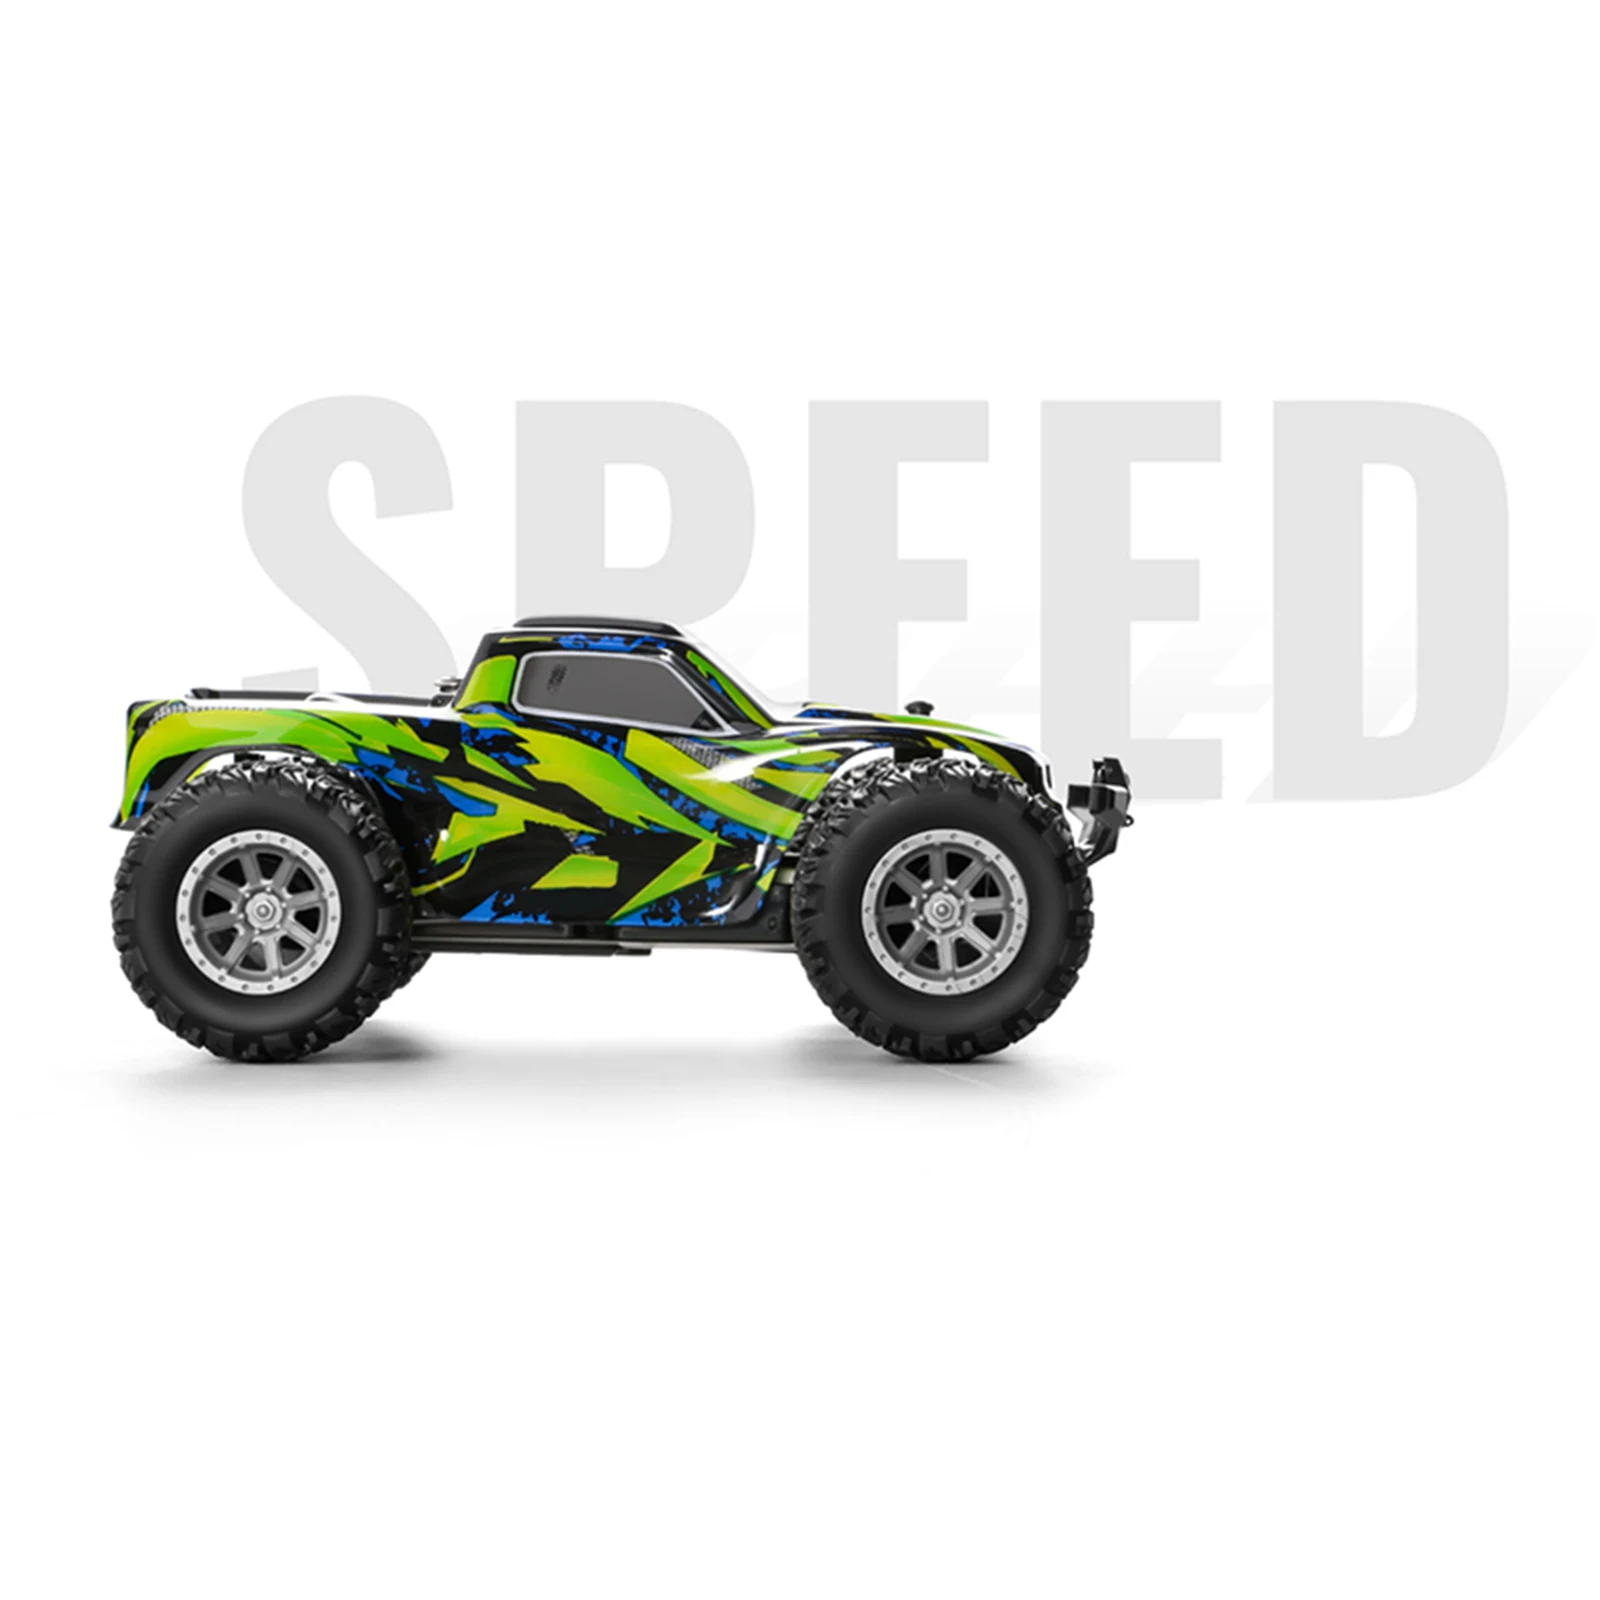 1:32 Scale Remote Control Car High Speed 20 Km/h Electric Toy for Kids Boys Girls RC Car Toys Gift